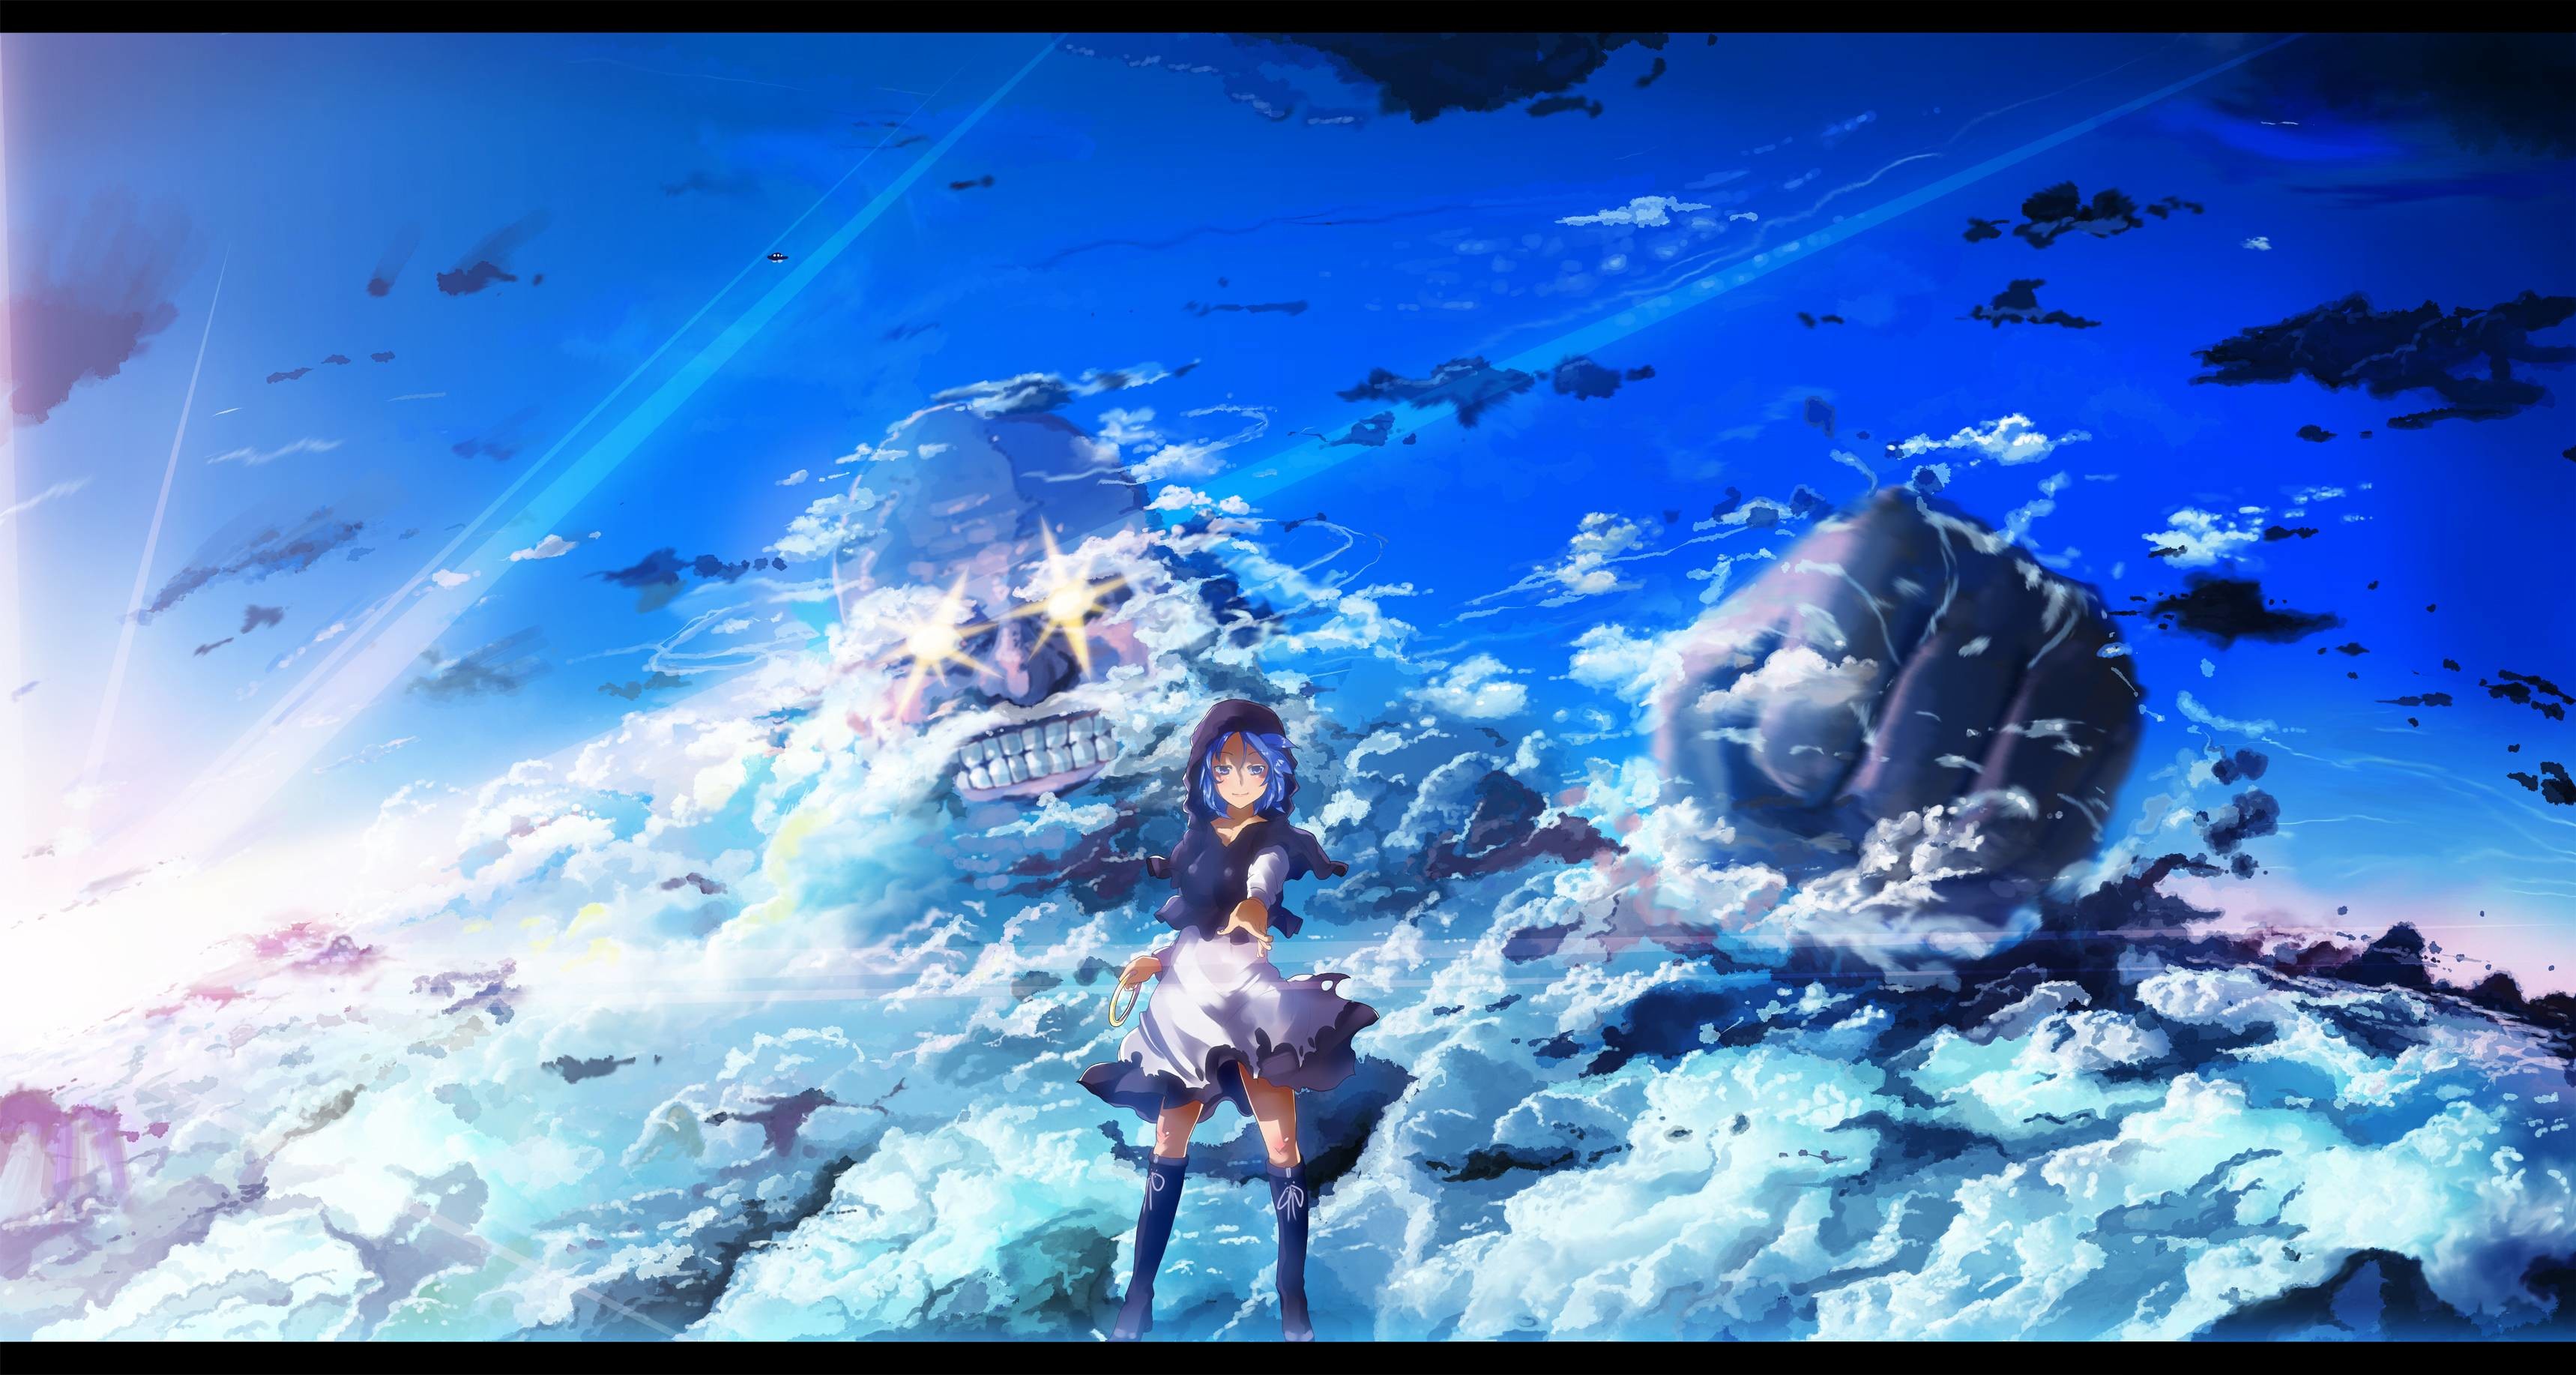 The Images of Blue Clouds Touhou Anime Skyscapes Kumoi Ichirin